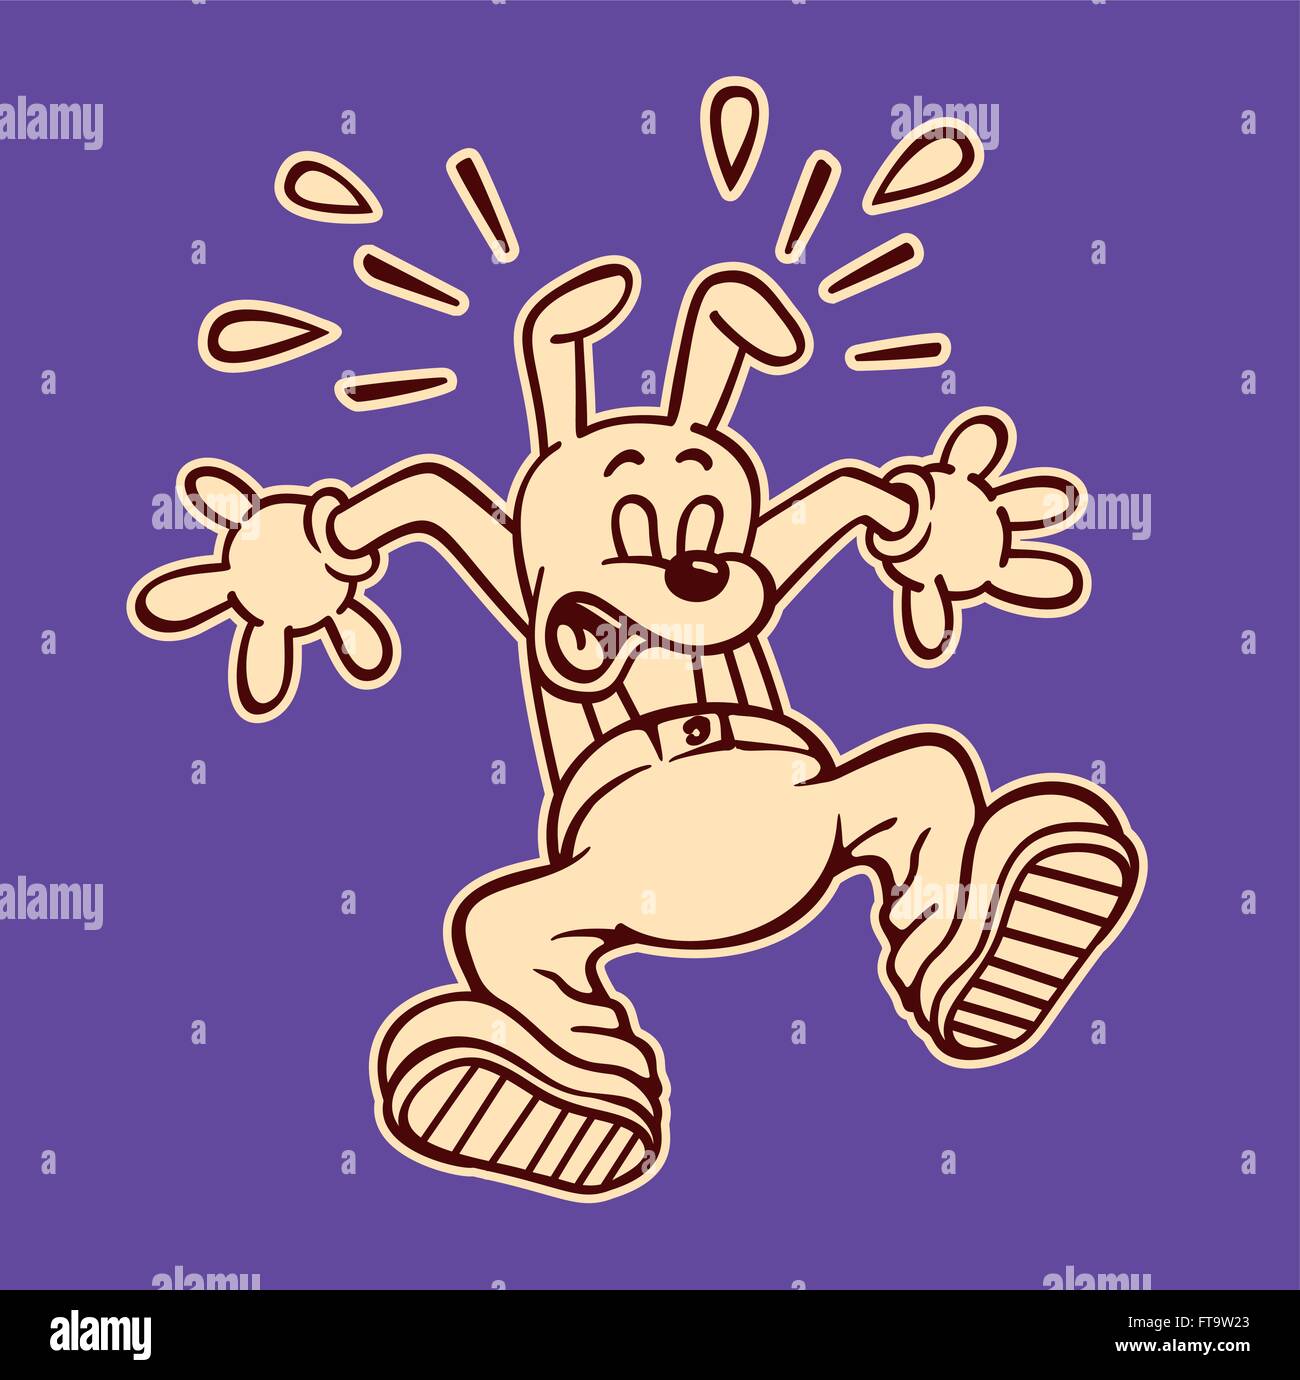 Vintage Toons: Wow! Retro cartoon dog shocked or astonished by unexpected surprise or something spooky, caught off guard, spring back in surprise Stock Vector